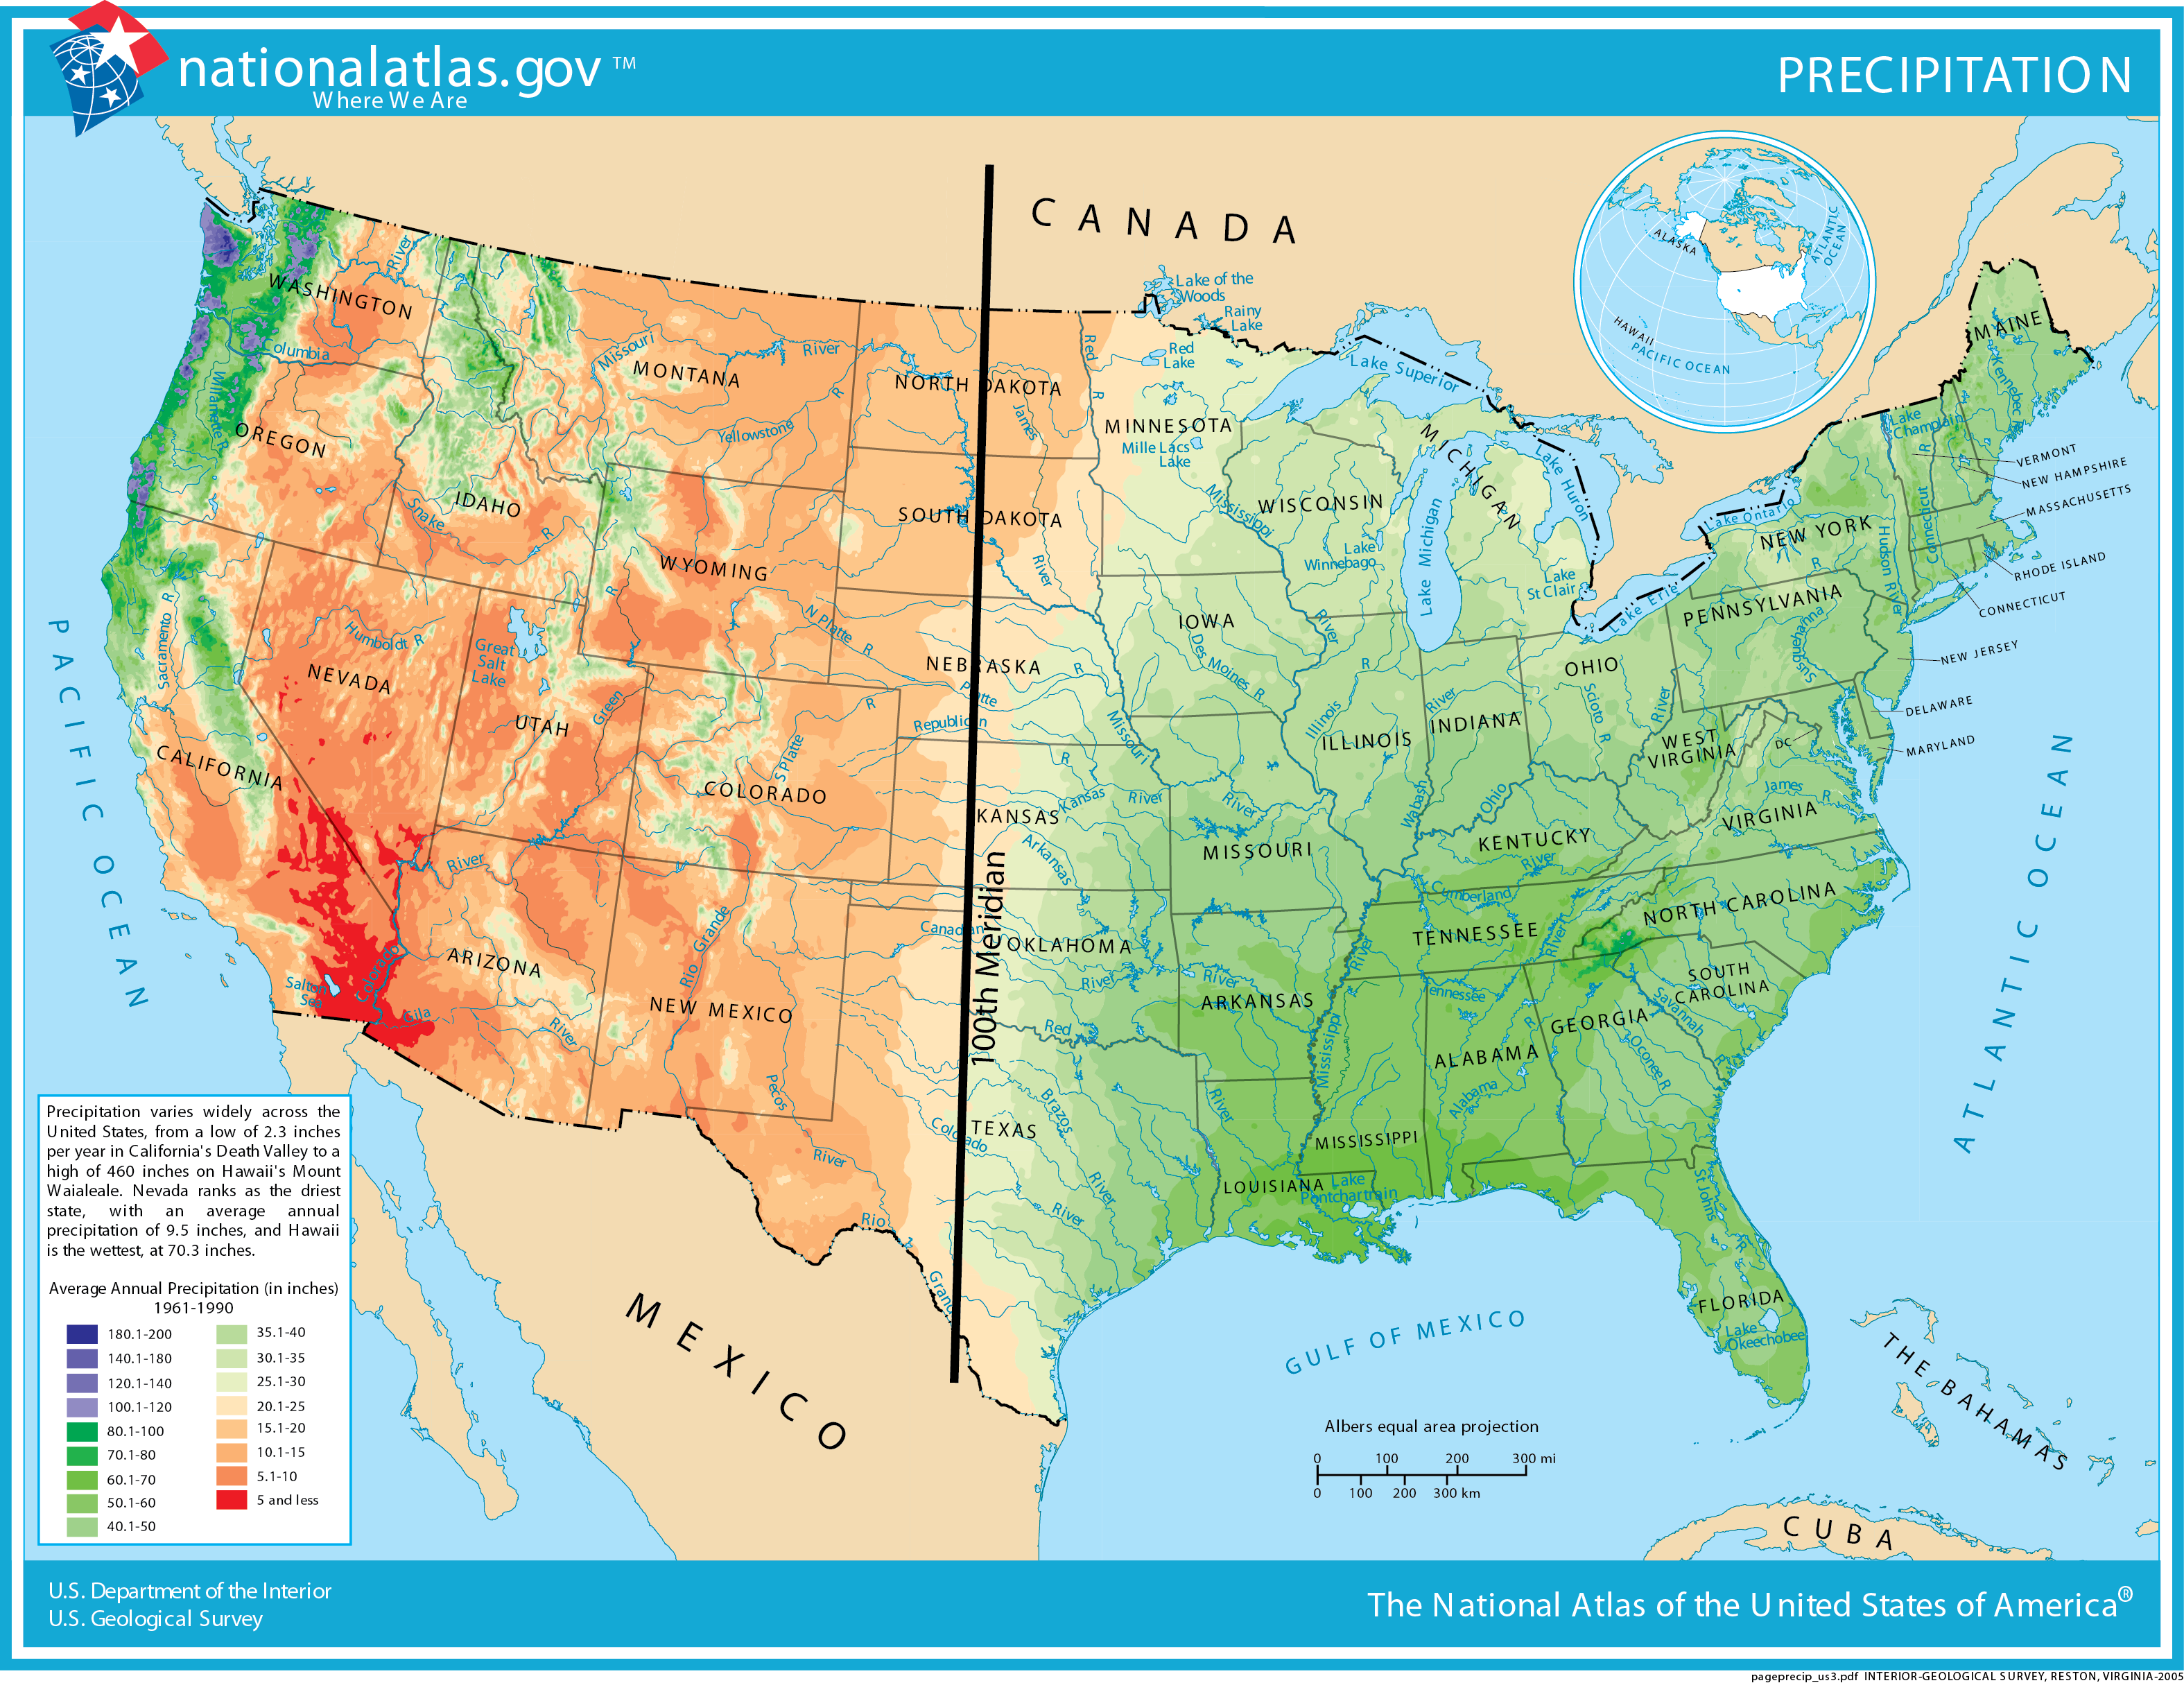 Map of the United States showing the distribution of precipitation with drier regions in the West. The 100th Meridian runs from North Dakota through Texas.